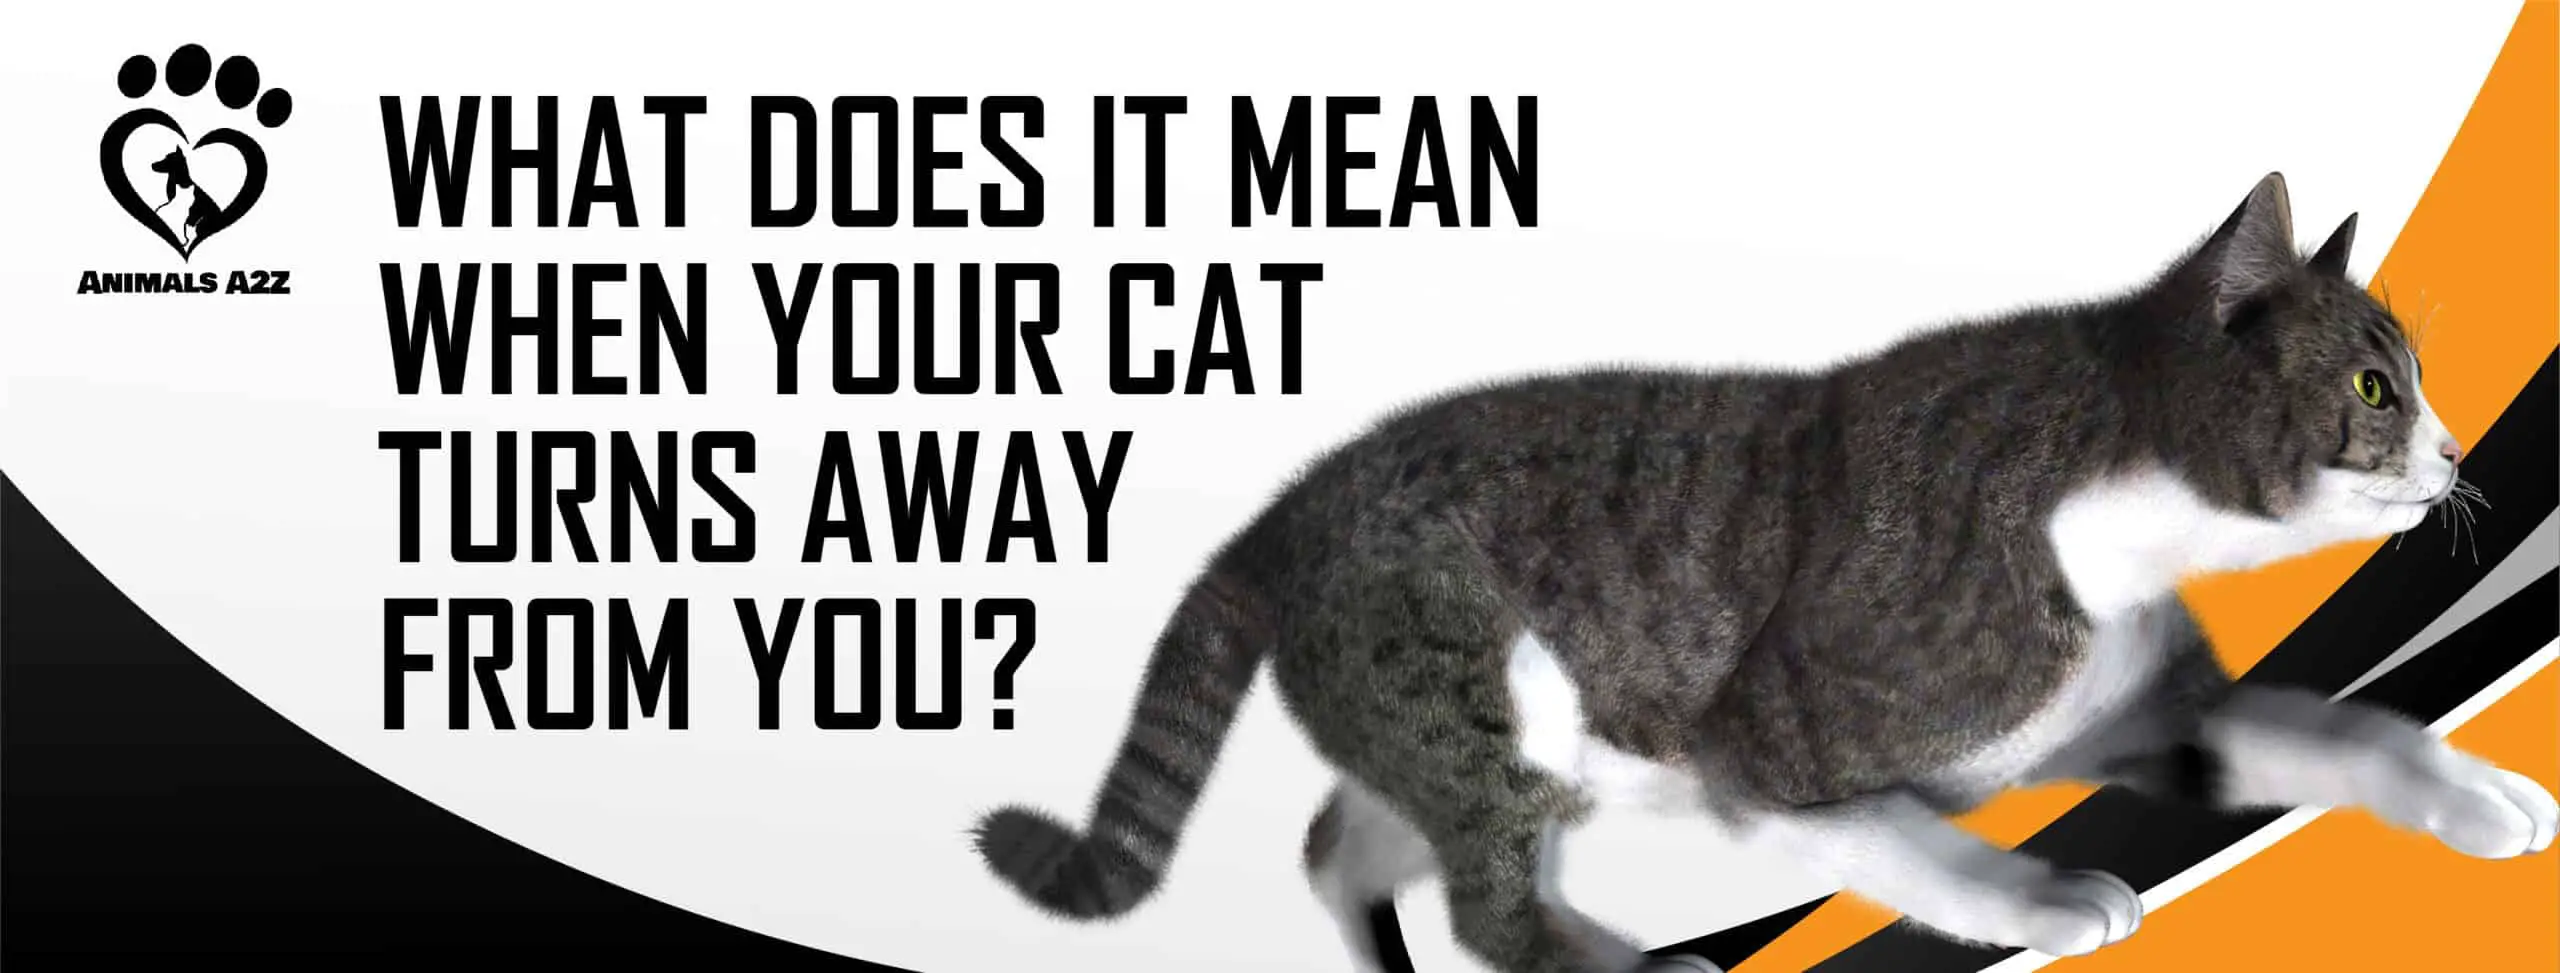 What does it mean when your cat turns away from you